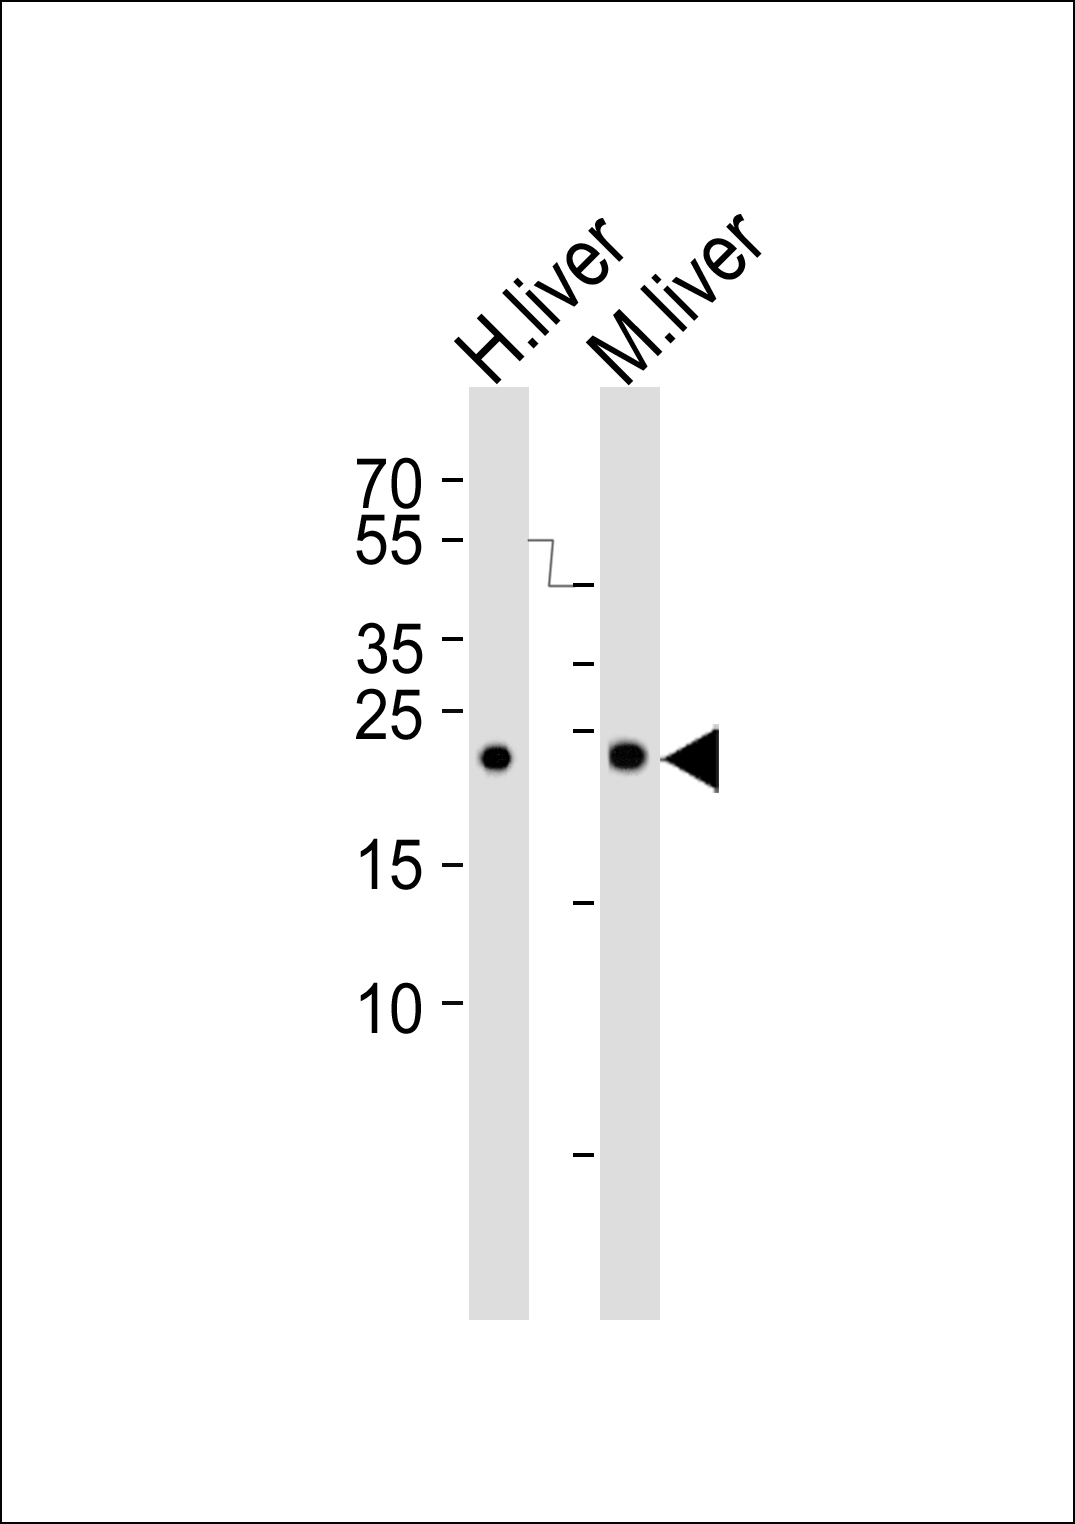 BLVRB Antibody - C-terminal (OAAB18150) in Human liver and mouse liver tissue lysate (from left to right) using Western Blot